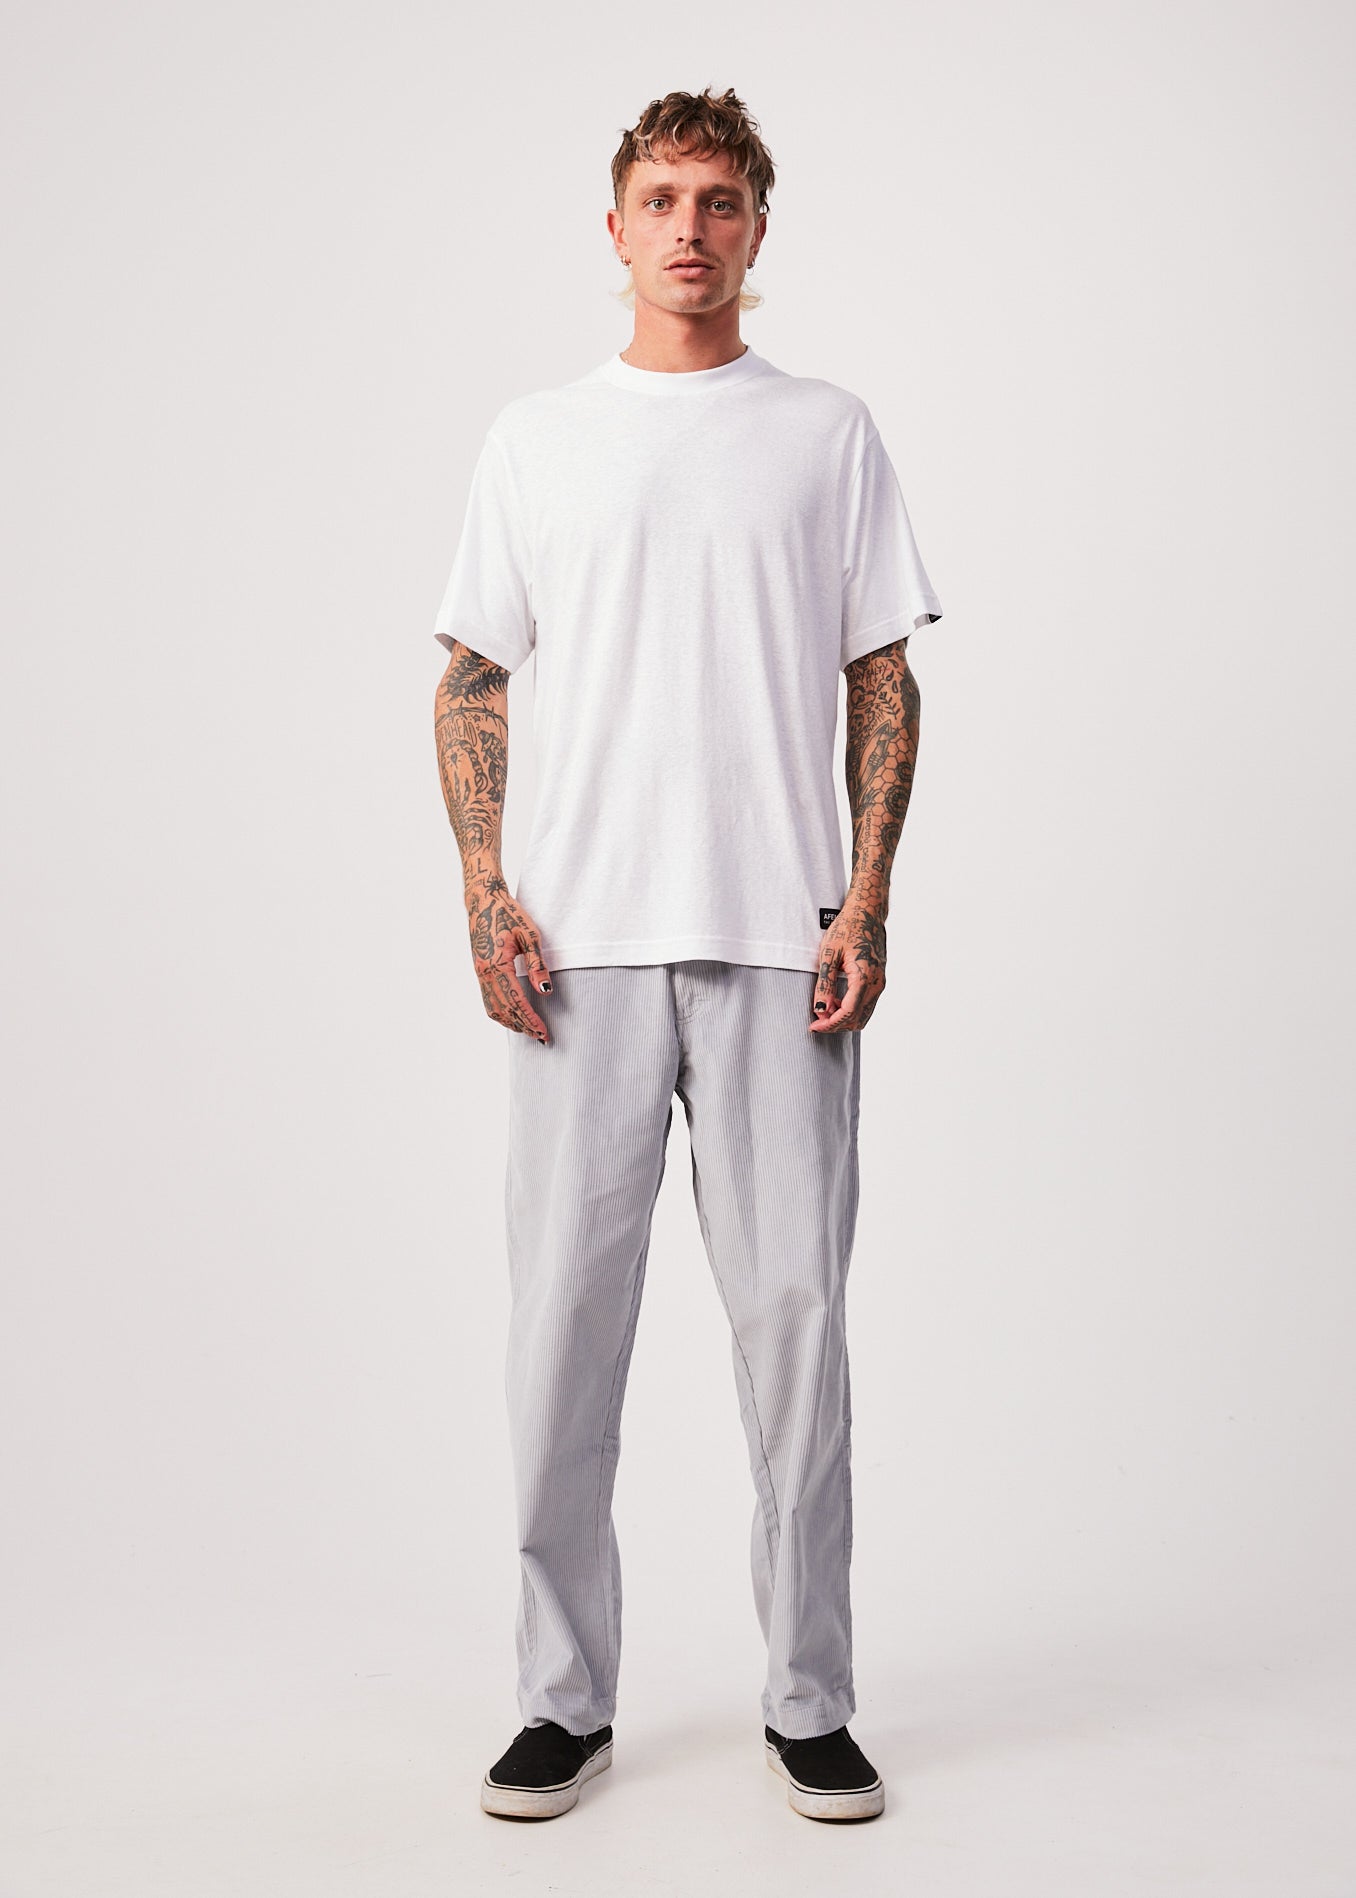 t shirts for baggy pants menTikTok Search